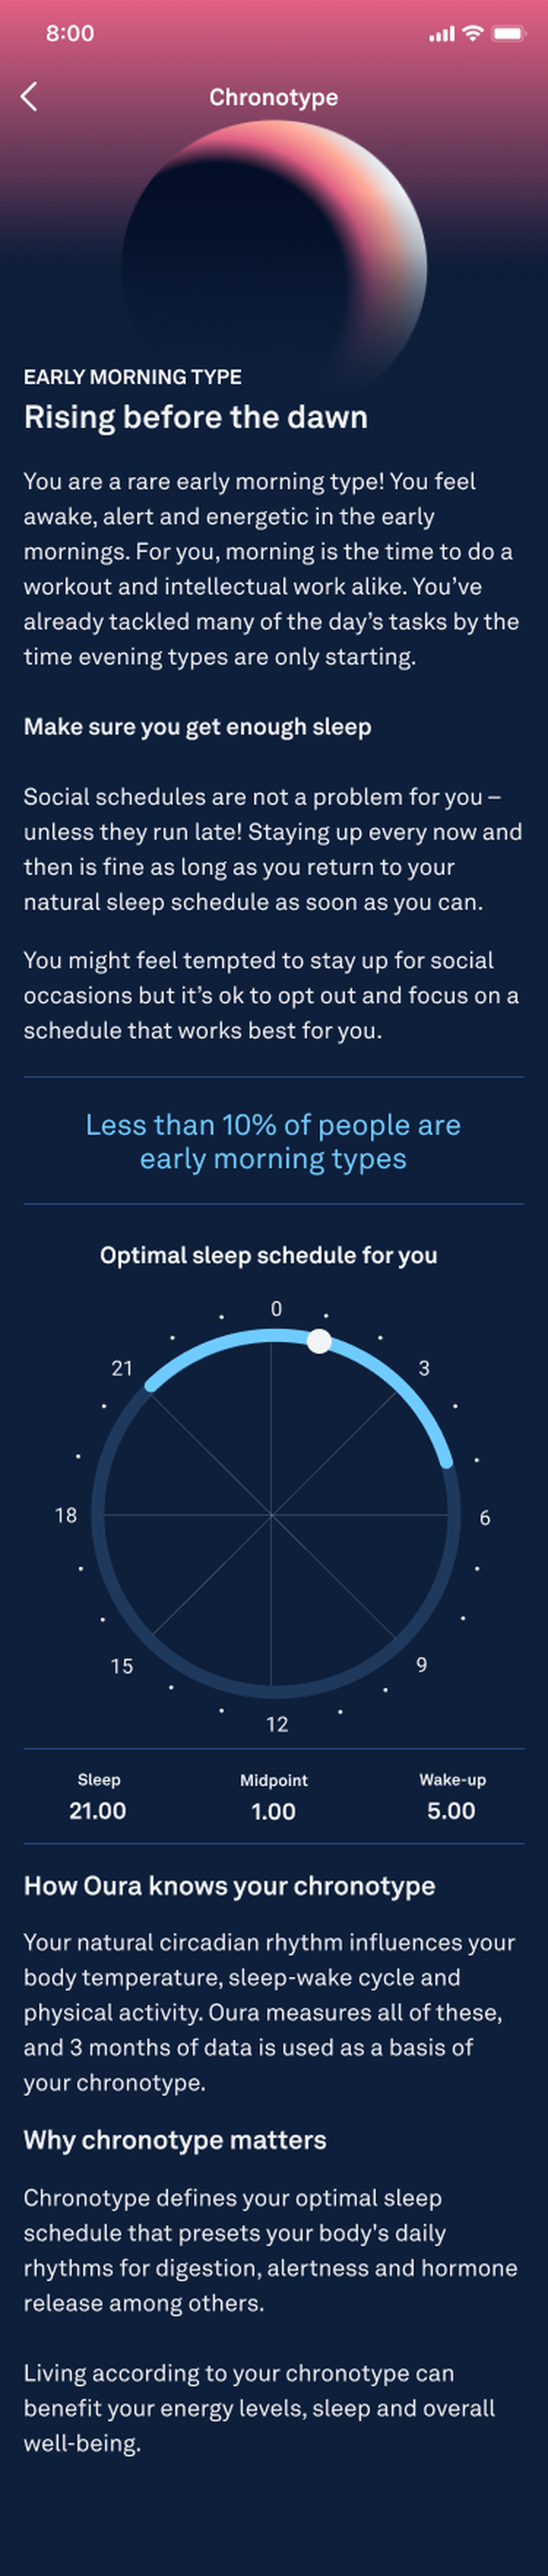 screenshot of Chronotype description for Early Morning types in the Oura app